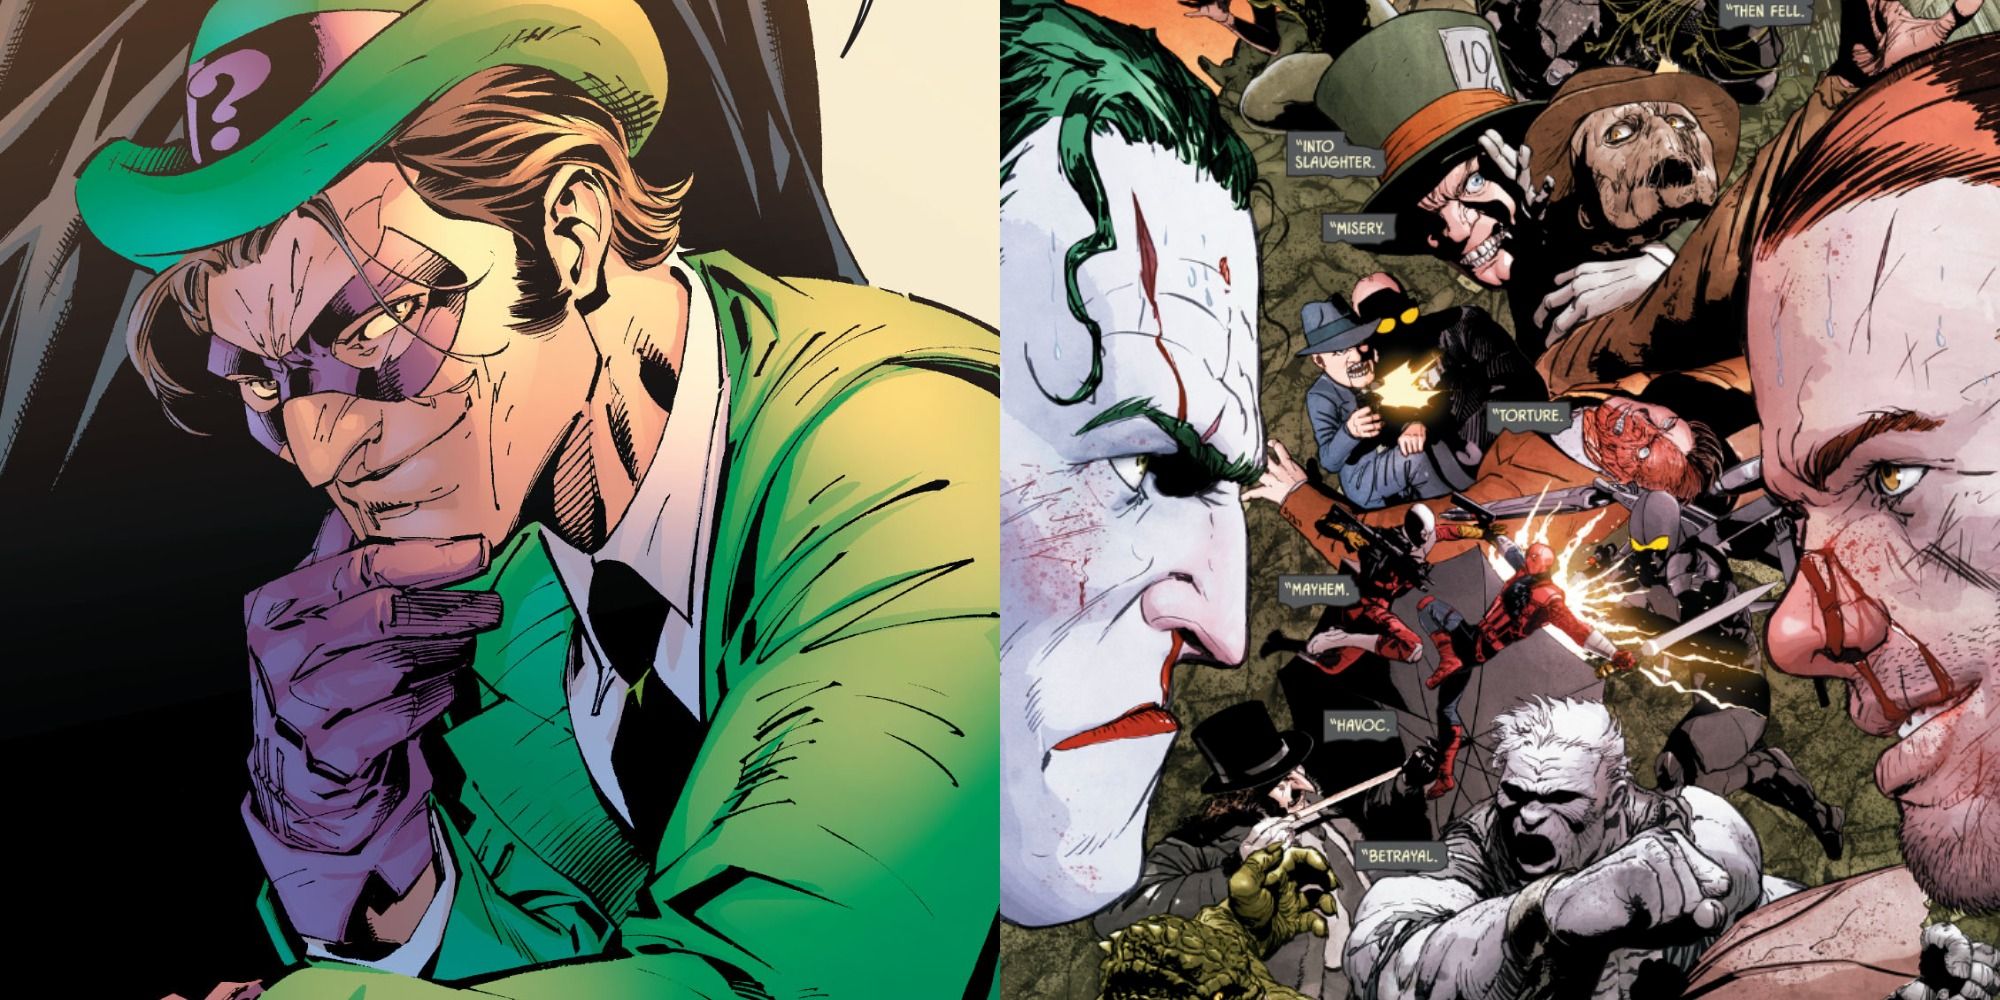 Splirt image of Riddler, and Riddle and Joker facing off